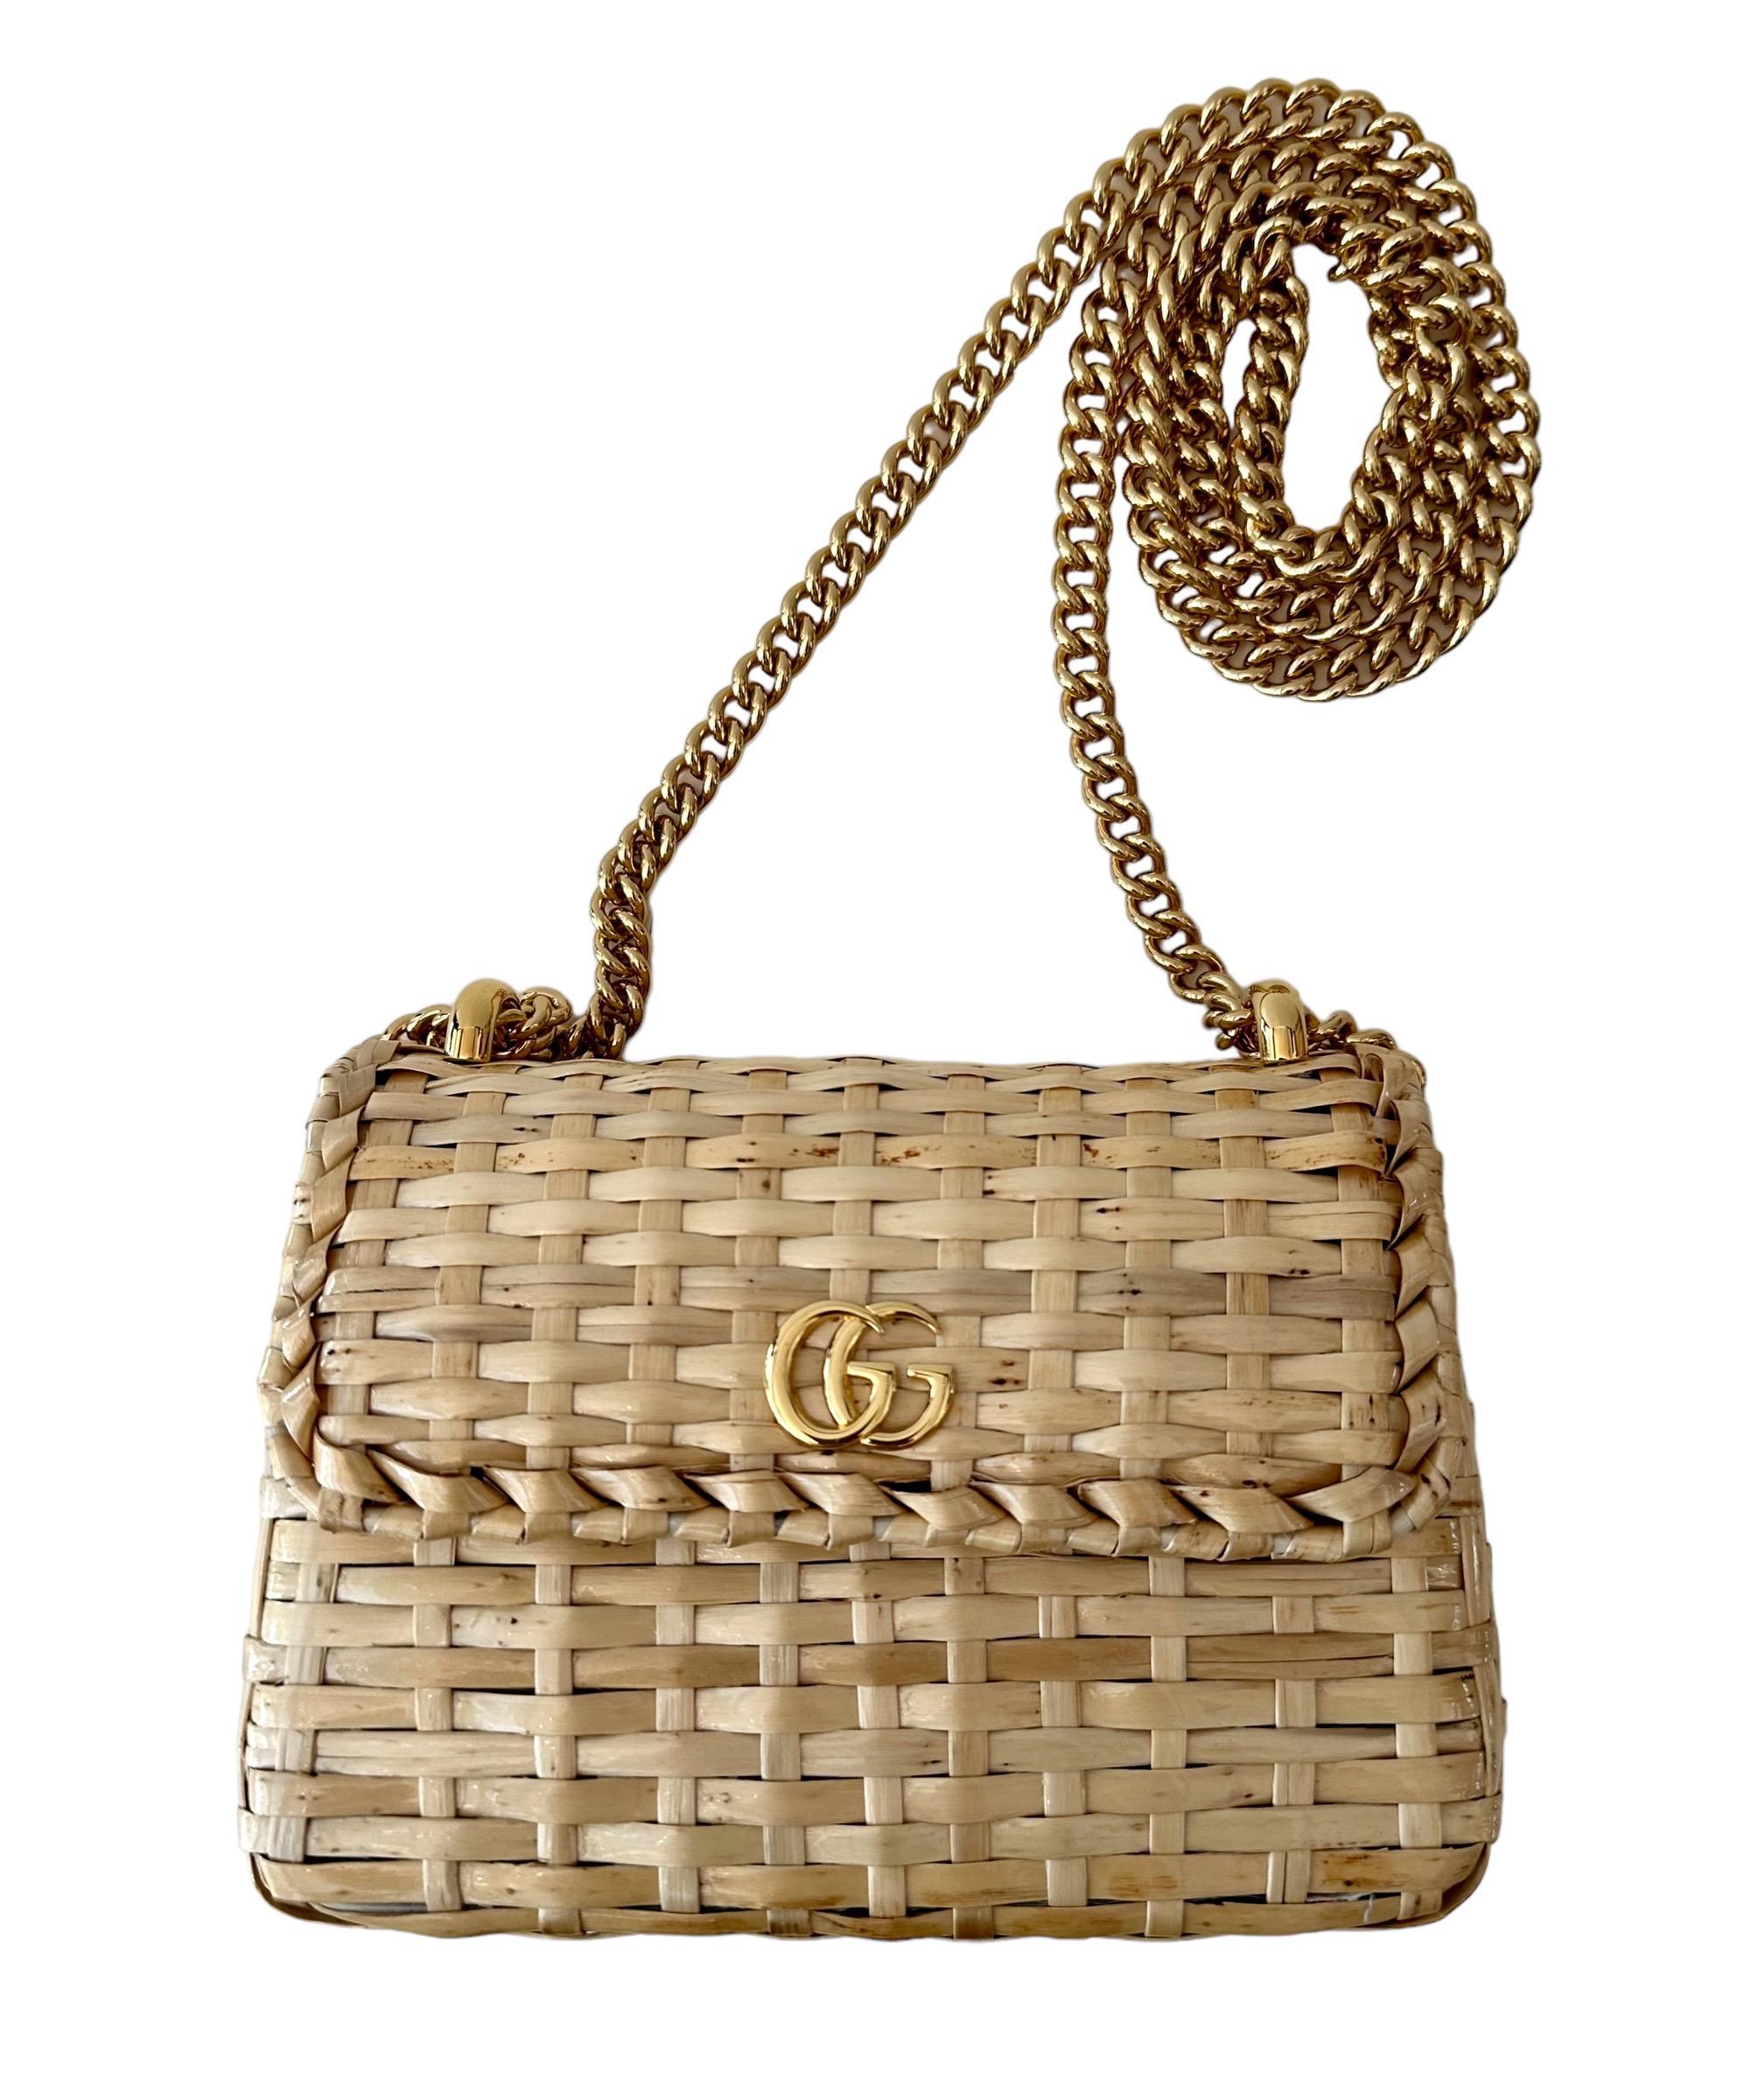 This pre-owned but new Mini Cestino was designed by Alessandro Michele for the house of Gucci.
It is crafted of woven straw with a harden glaze and features a polished gold chain-link shoulder strap and a polished gold GG logo snap closure on the